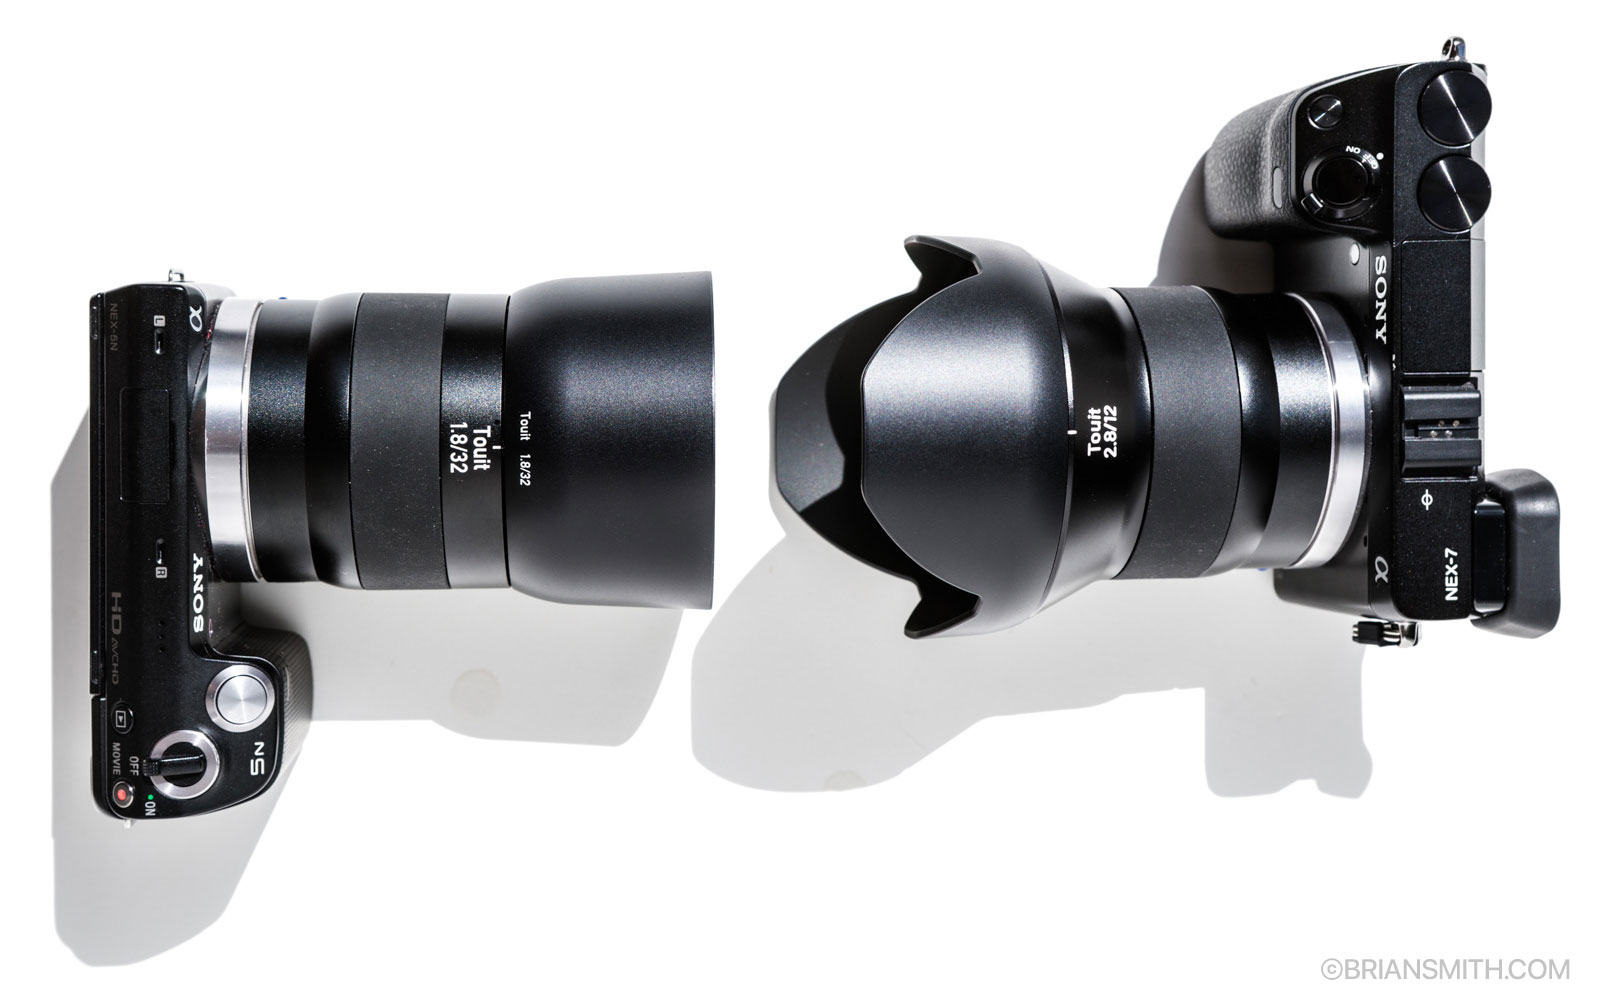 Zeiss Touit 12mm and 32mm lenses